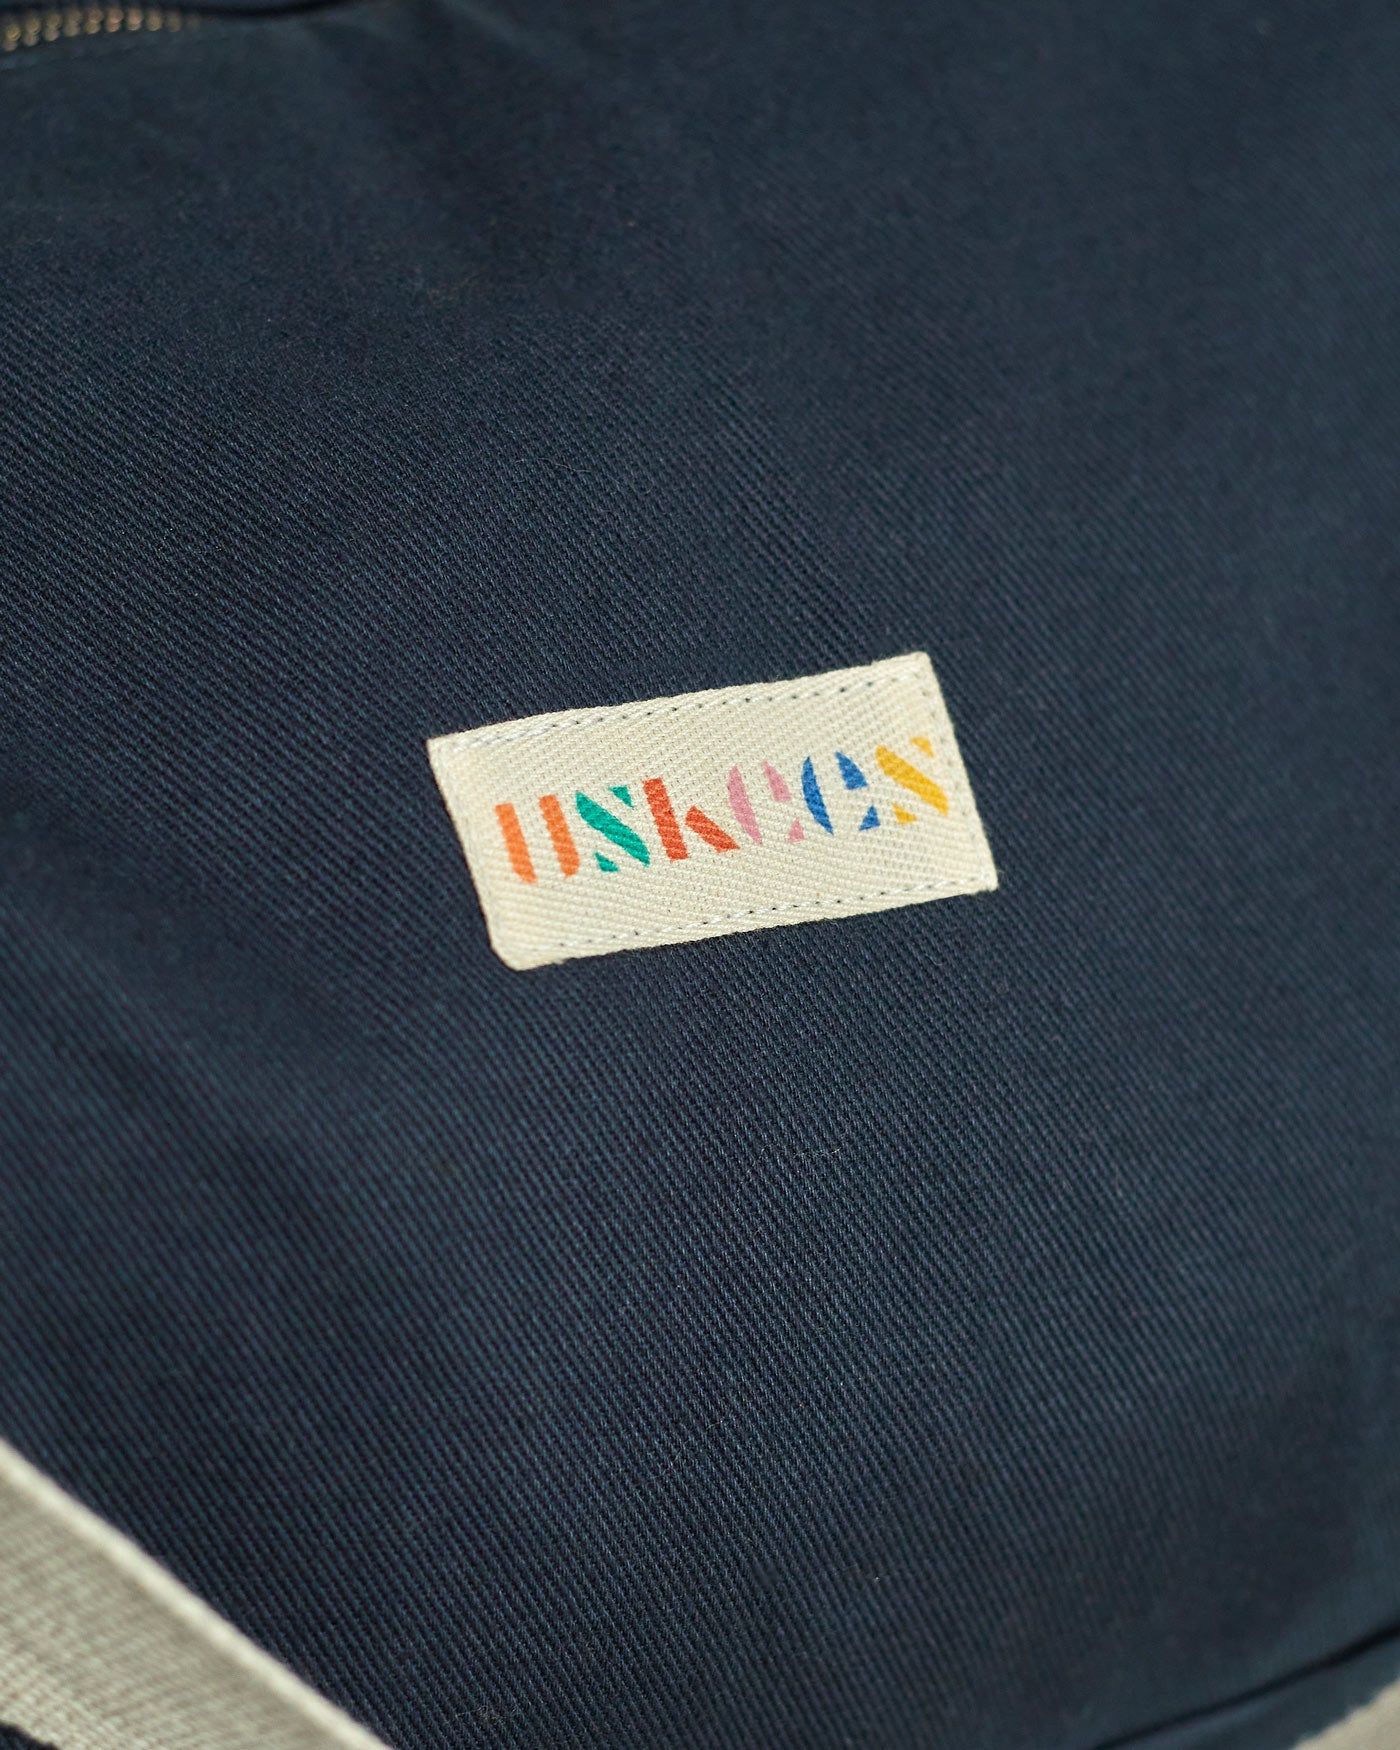 Close-up view of Uskees logo and zipper of the #0403 barrel bag in blueberry.